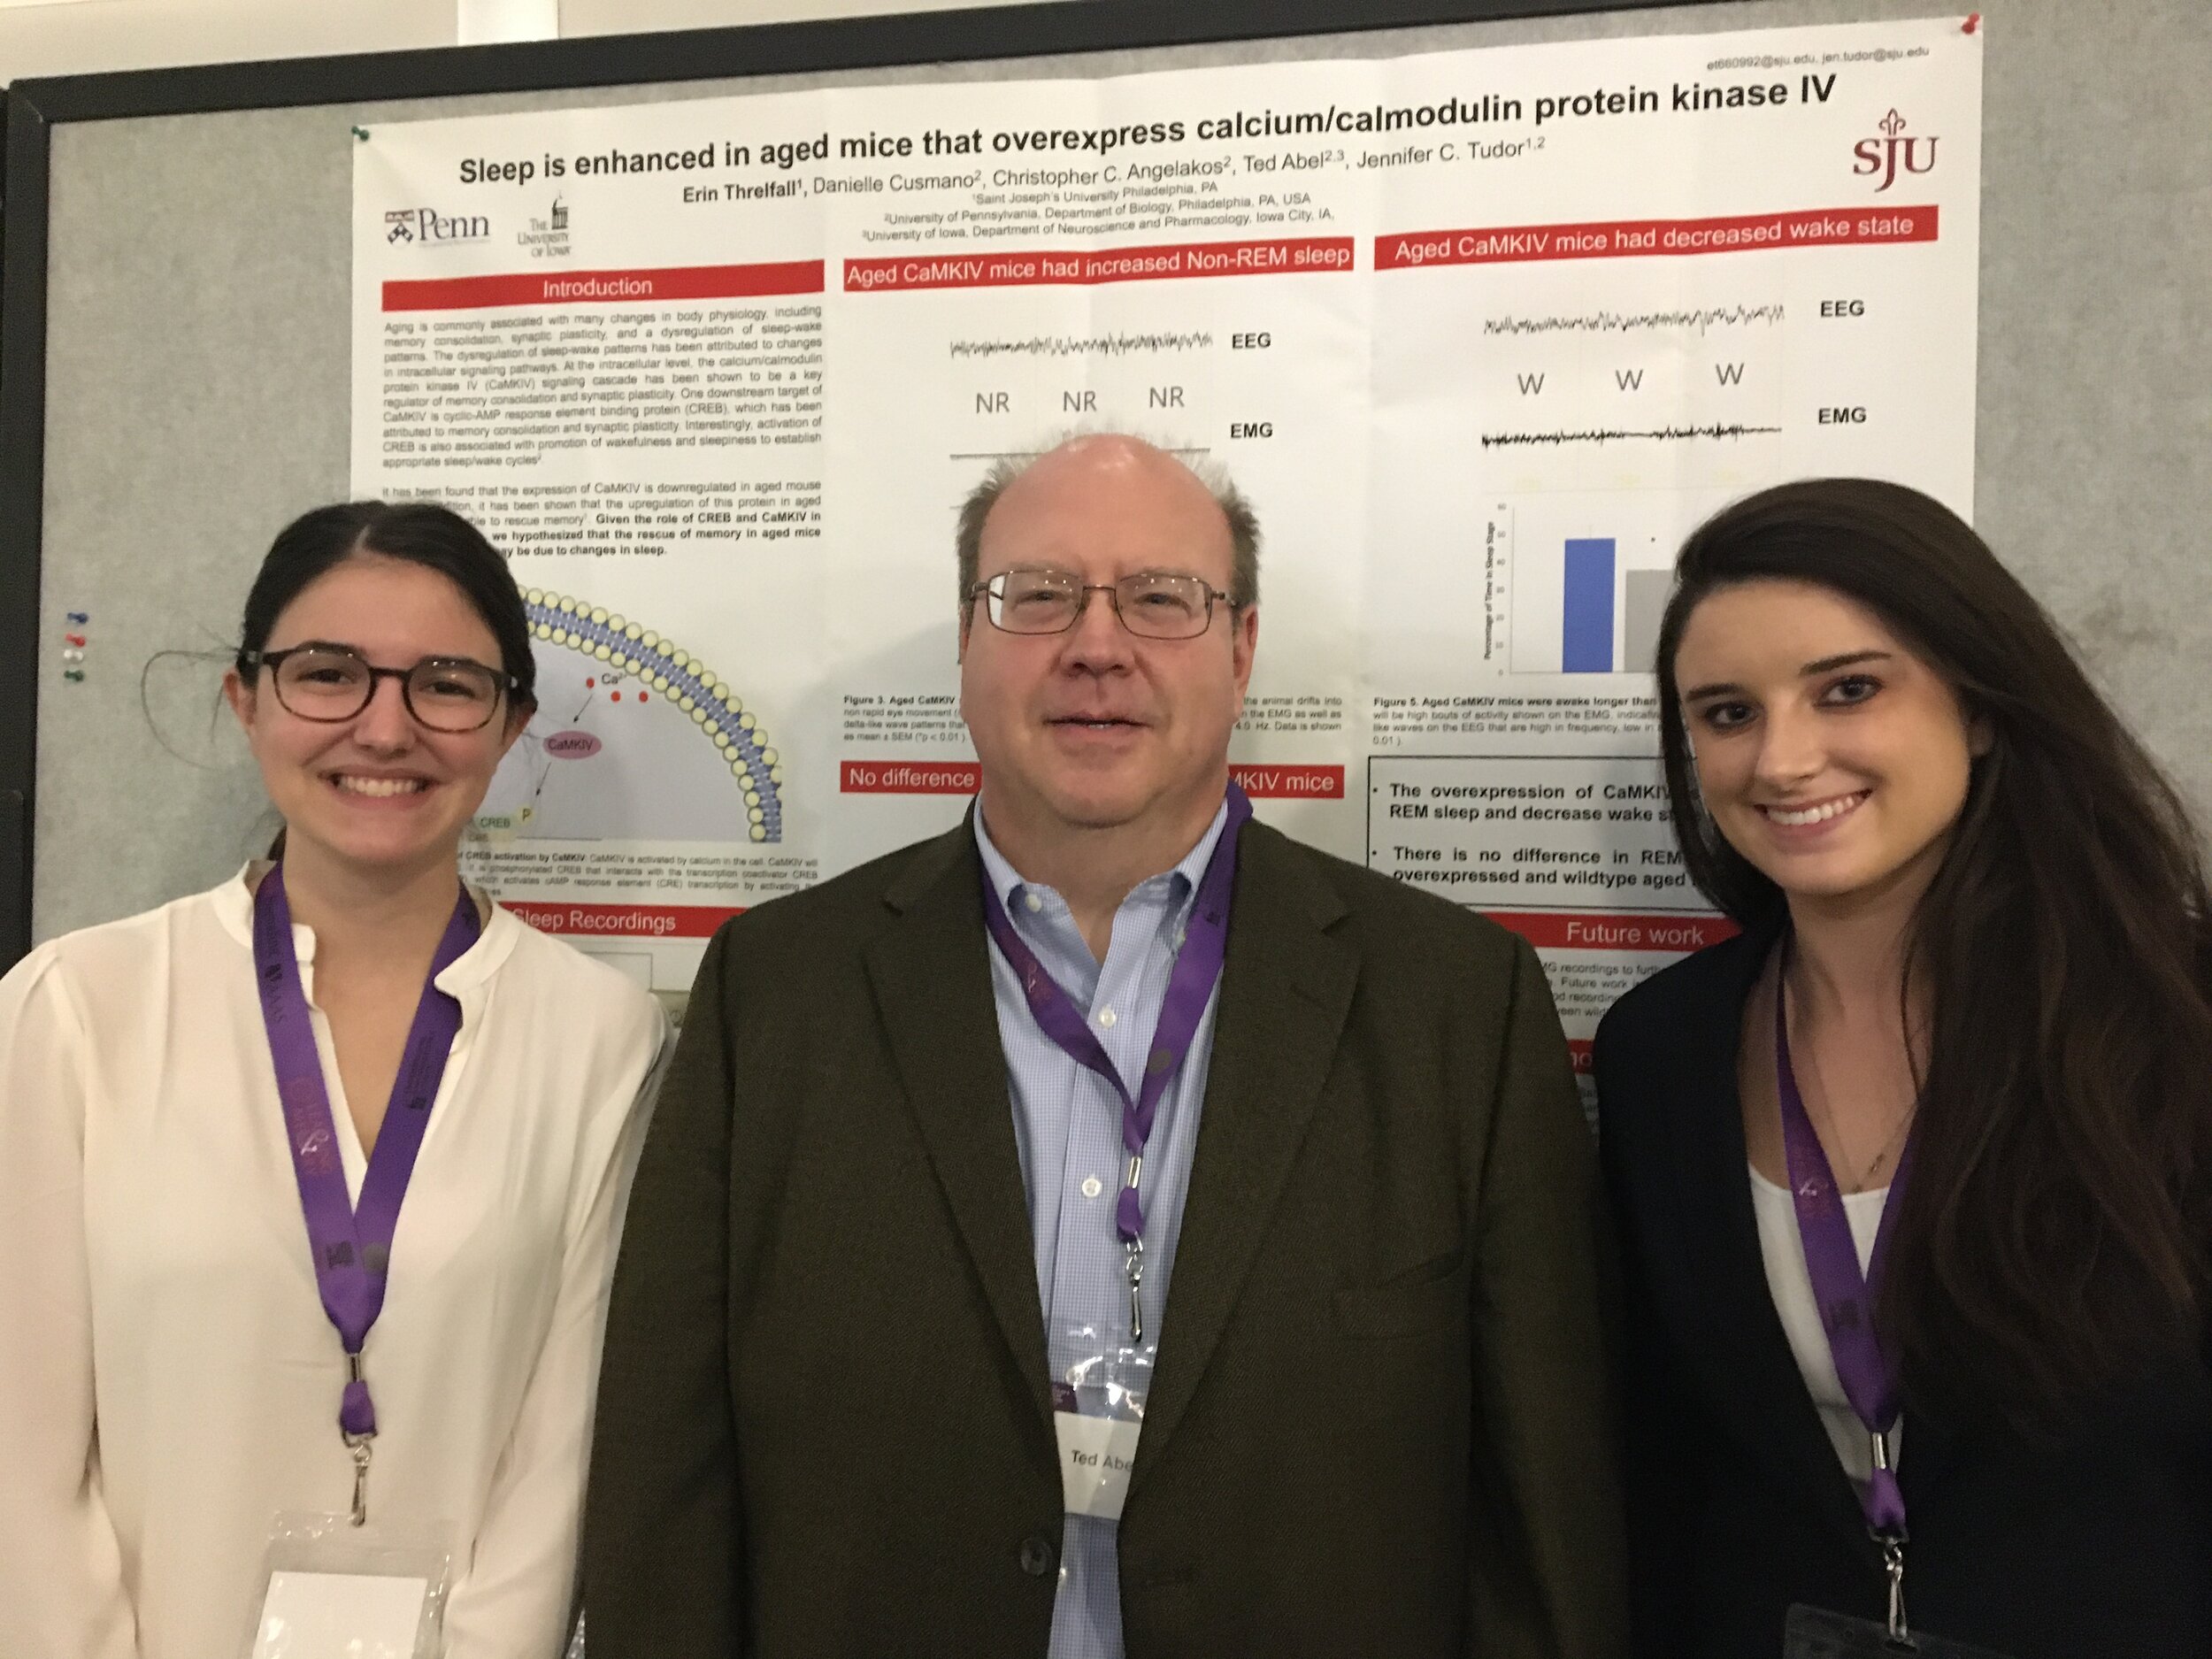 Molecular and Cellular Cognition Society 2019 annual meeting with Dr. Ted Abel